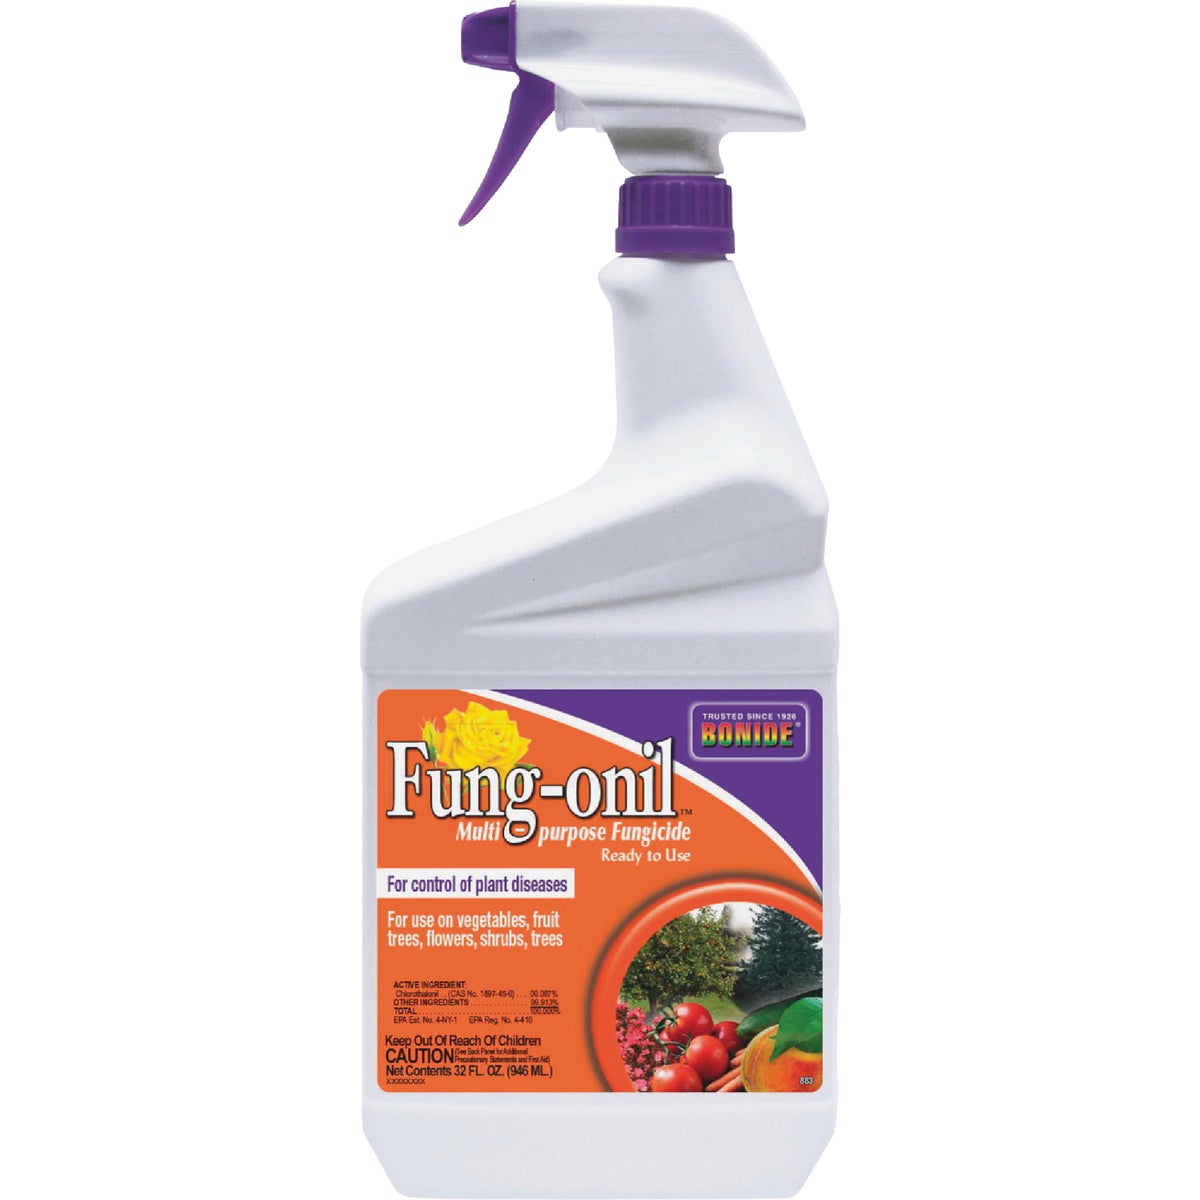 Bonide Fung-Onil 32 Oz. Ready To Use Trigger Spray Fungicide